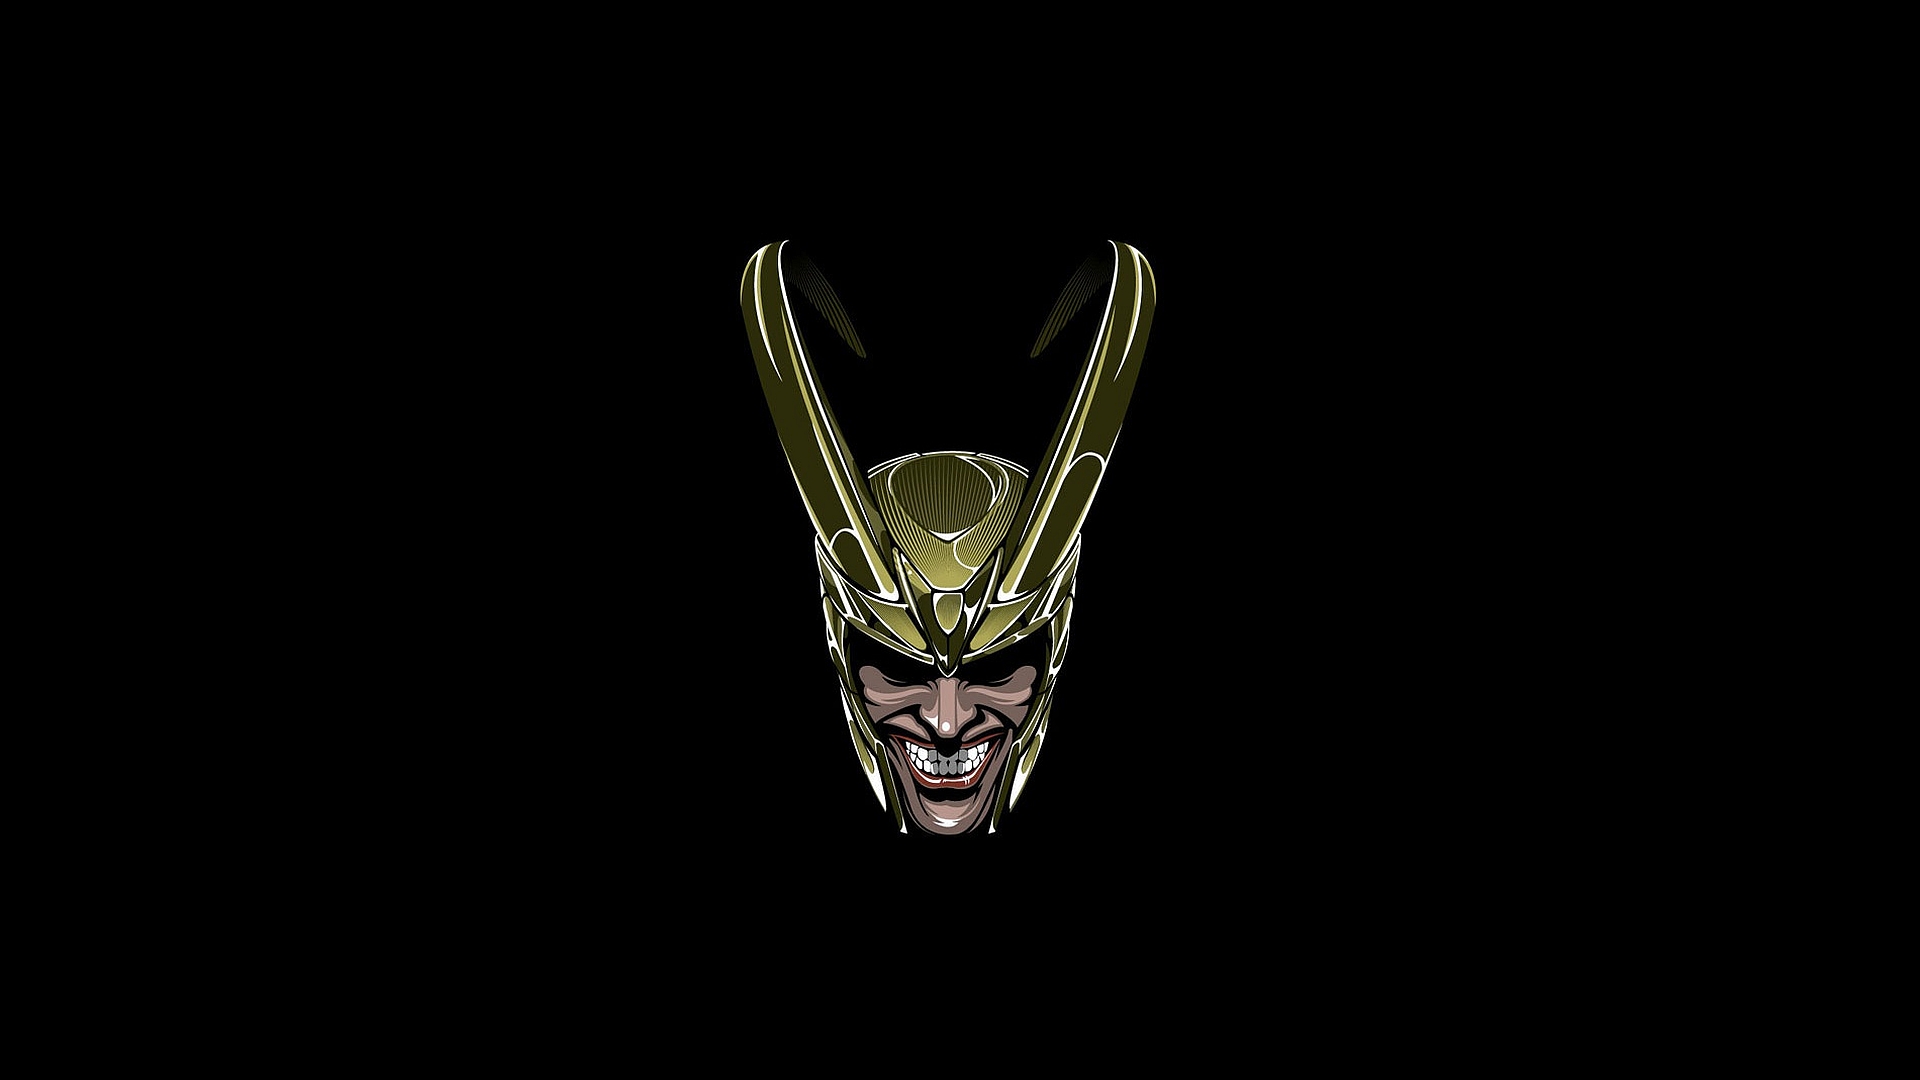 170+ Loki (Marvel Comics) HD Wallpapers and Backgrounds